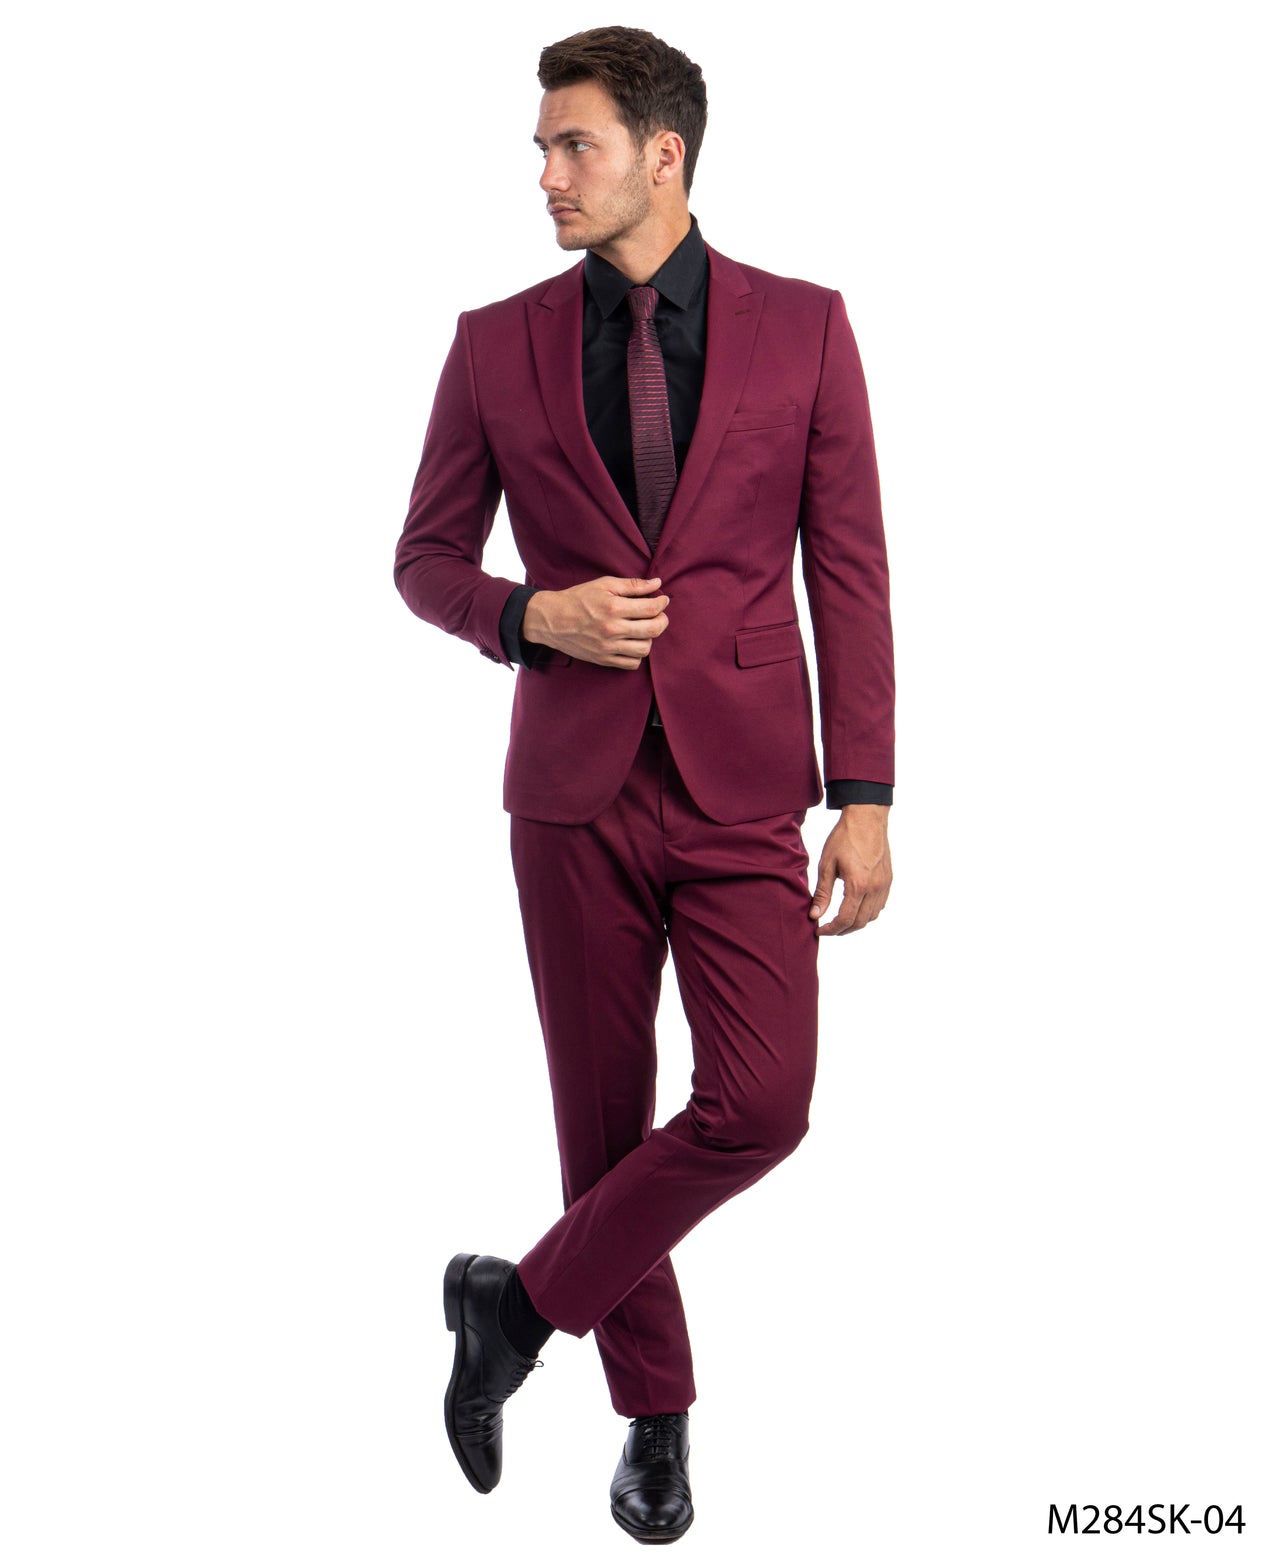 Burgundy Suit For Men Formal Suits For All Ocassions - Hattitude